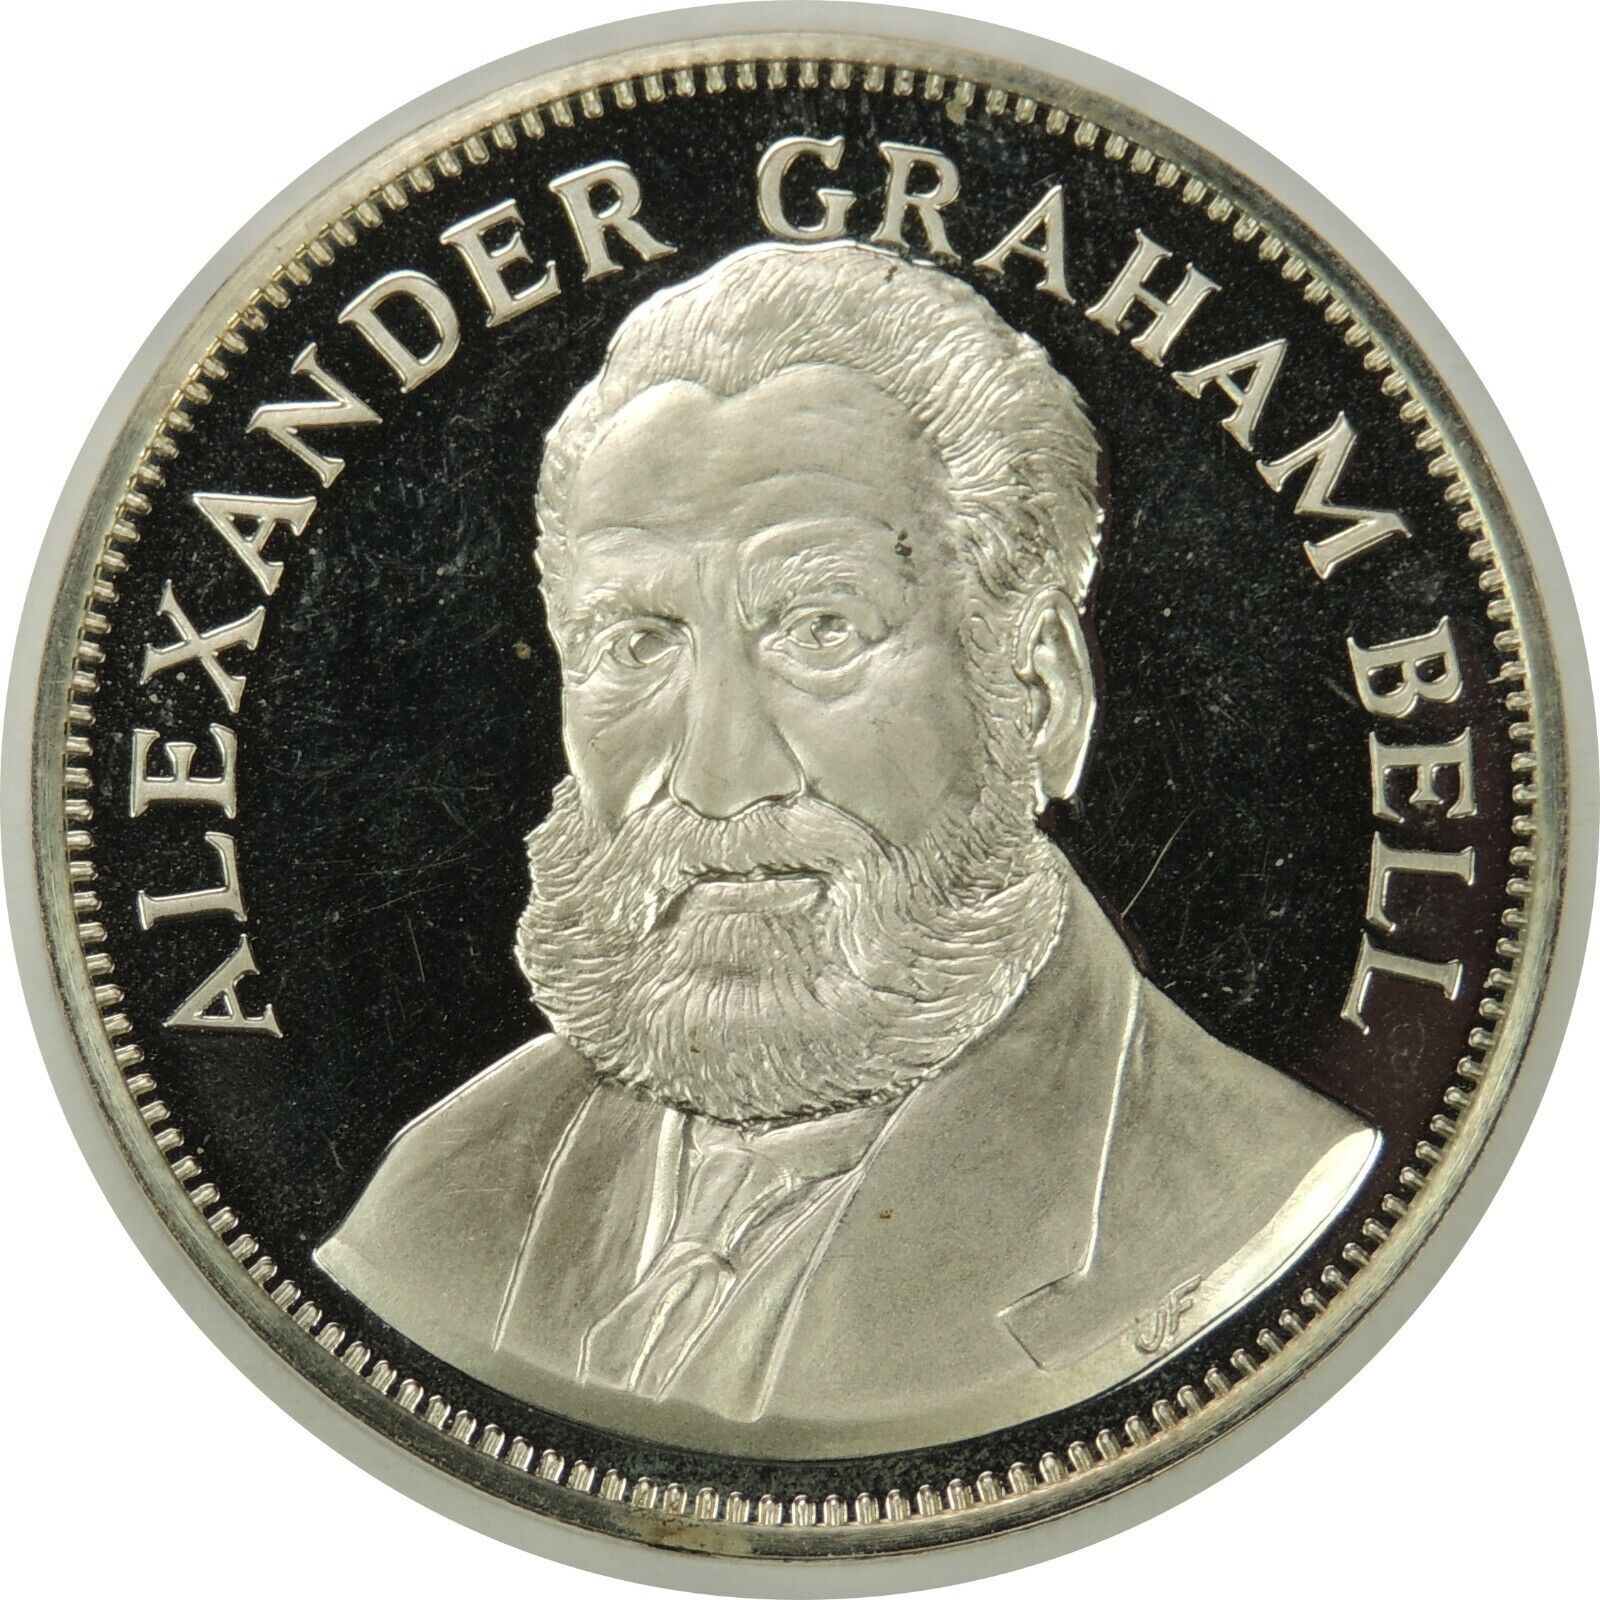 1971 ALEXANDER GRAHAM BELL 26g STERLING SILVER HIGH RELIEF PROOF (070520)